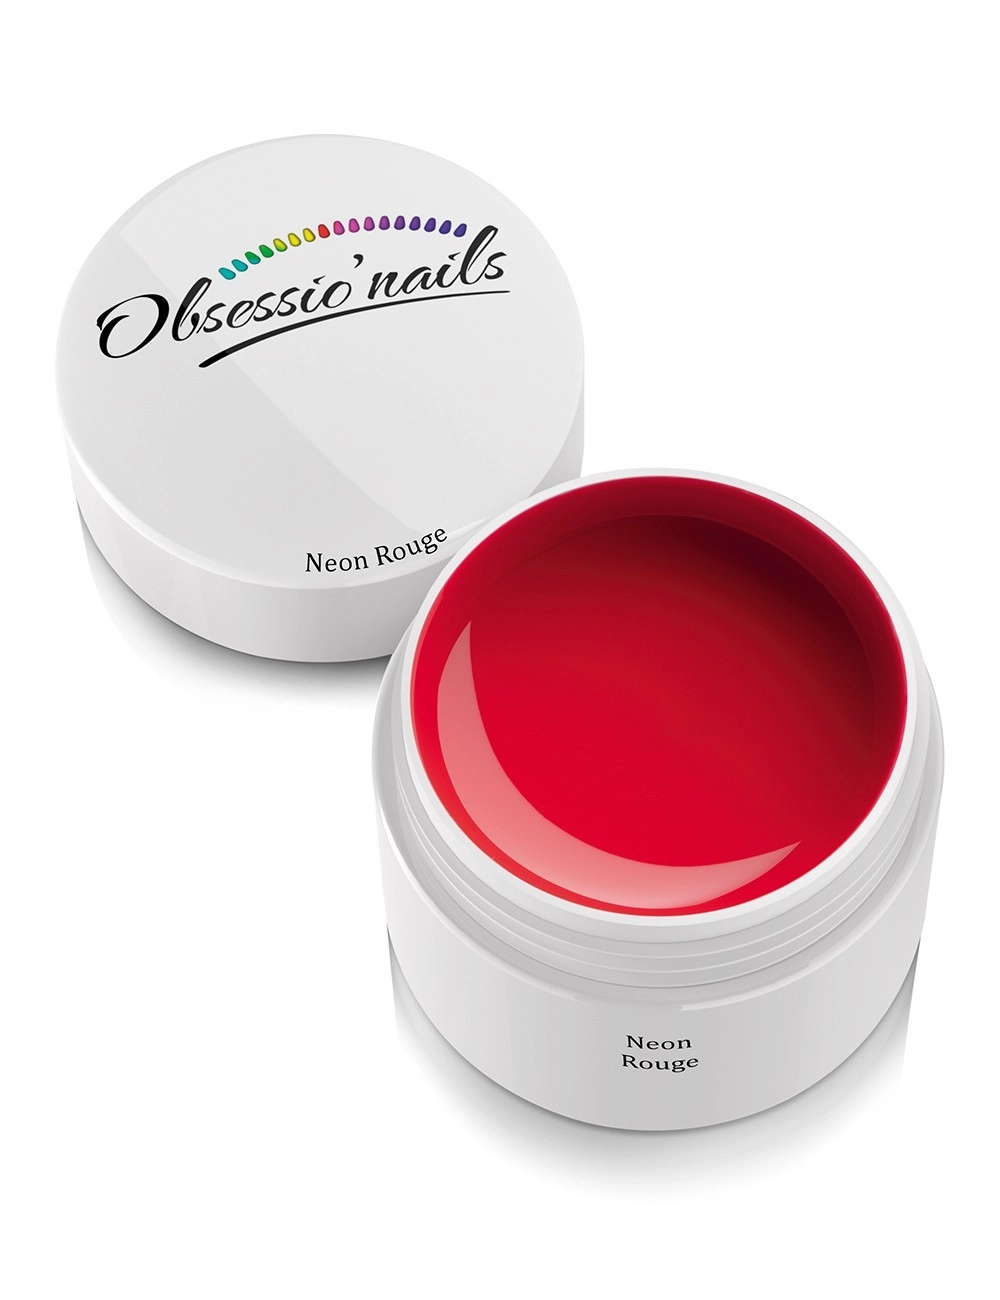 Gel uv pour ongles, couleur rouge neon.